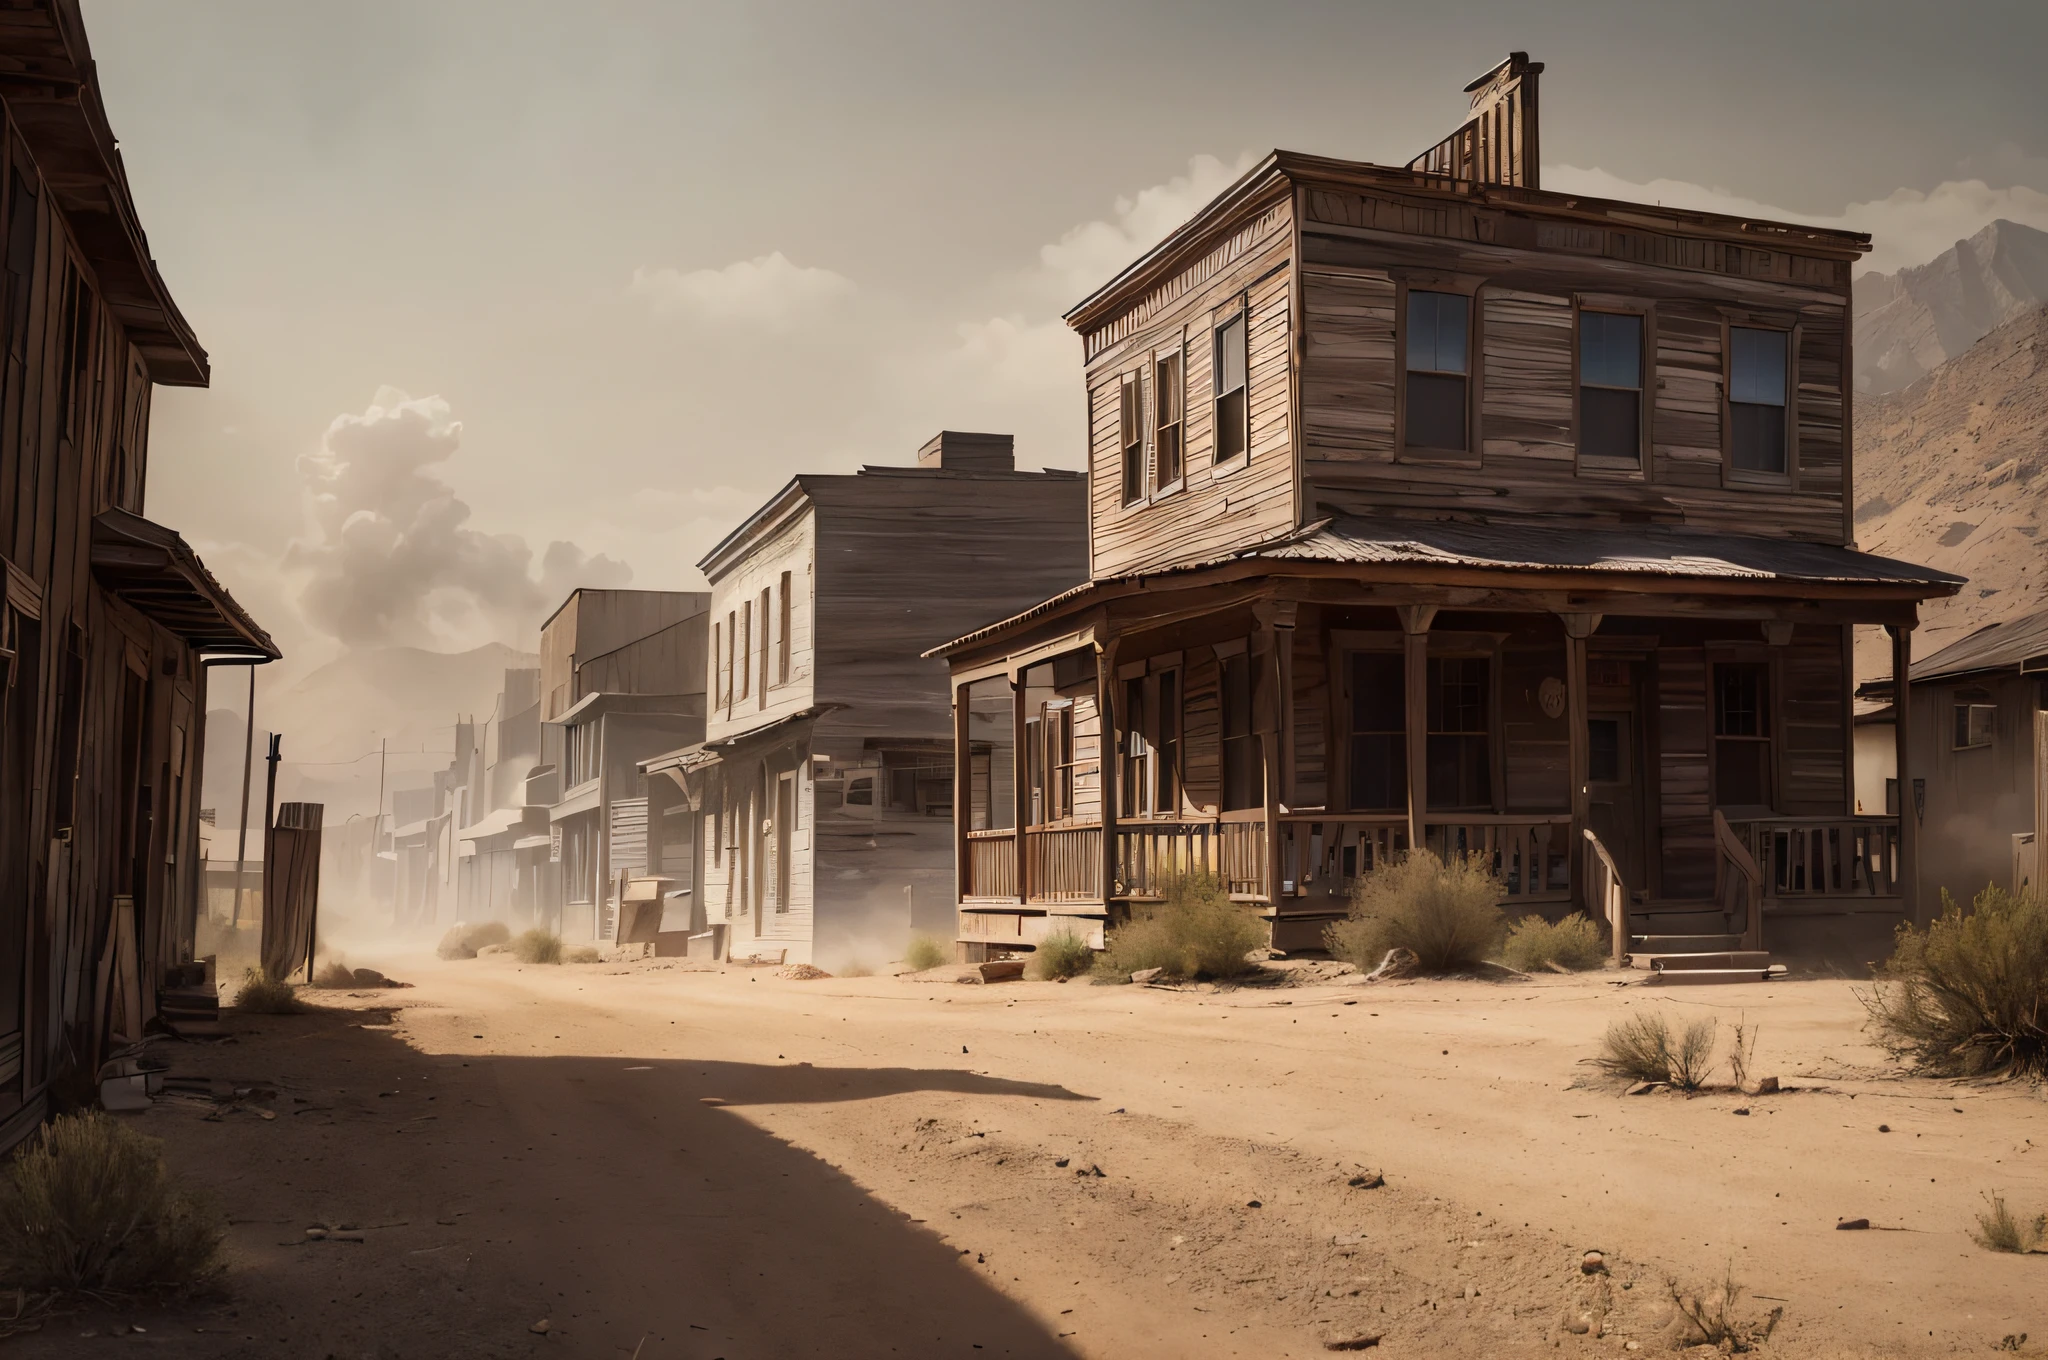 ((photo)), ((best quality)), ((masterpiece)), ((detailed)), ((cinematic shot), ((captured from eye level)), building exterior, an authentic, classic 1850's western movie style ghost town backdrop, dust storm background, tumble weeds scattered around.